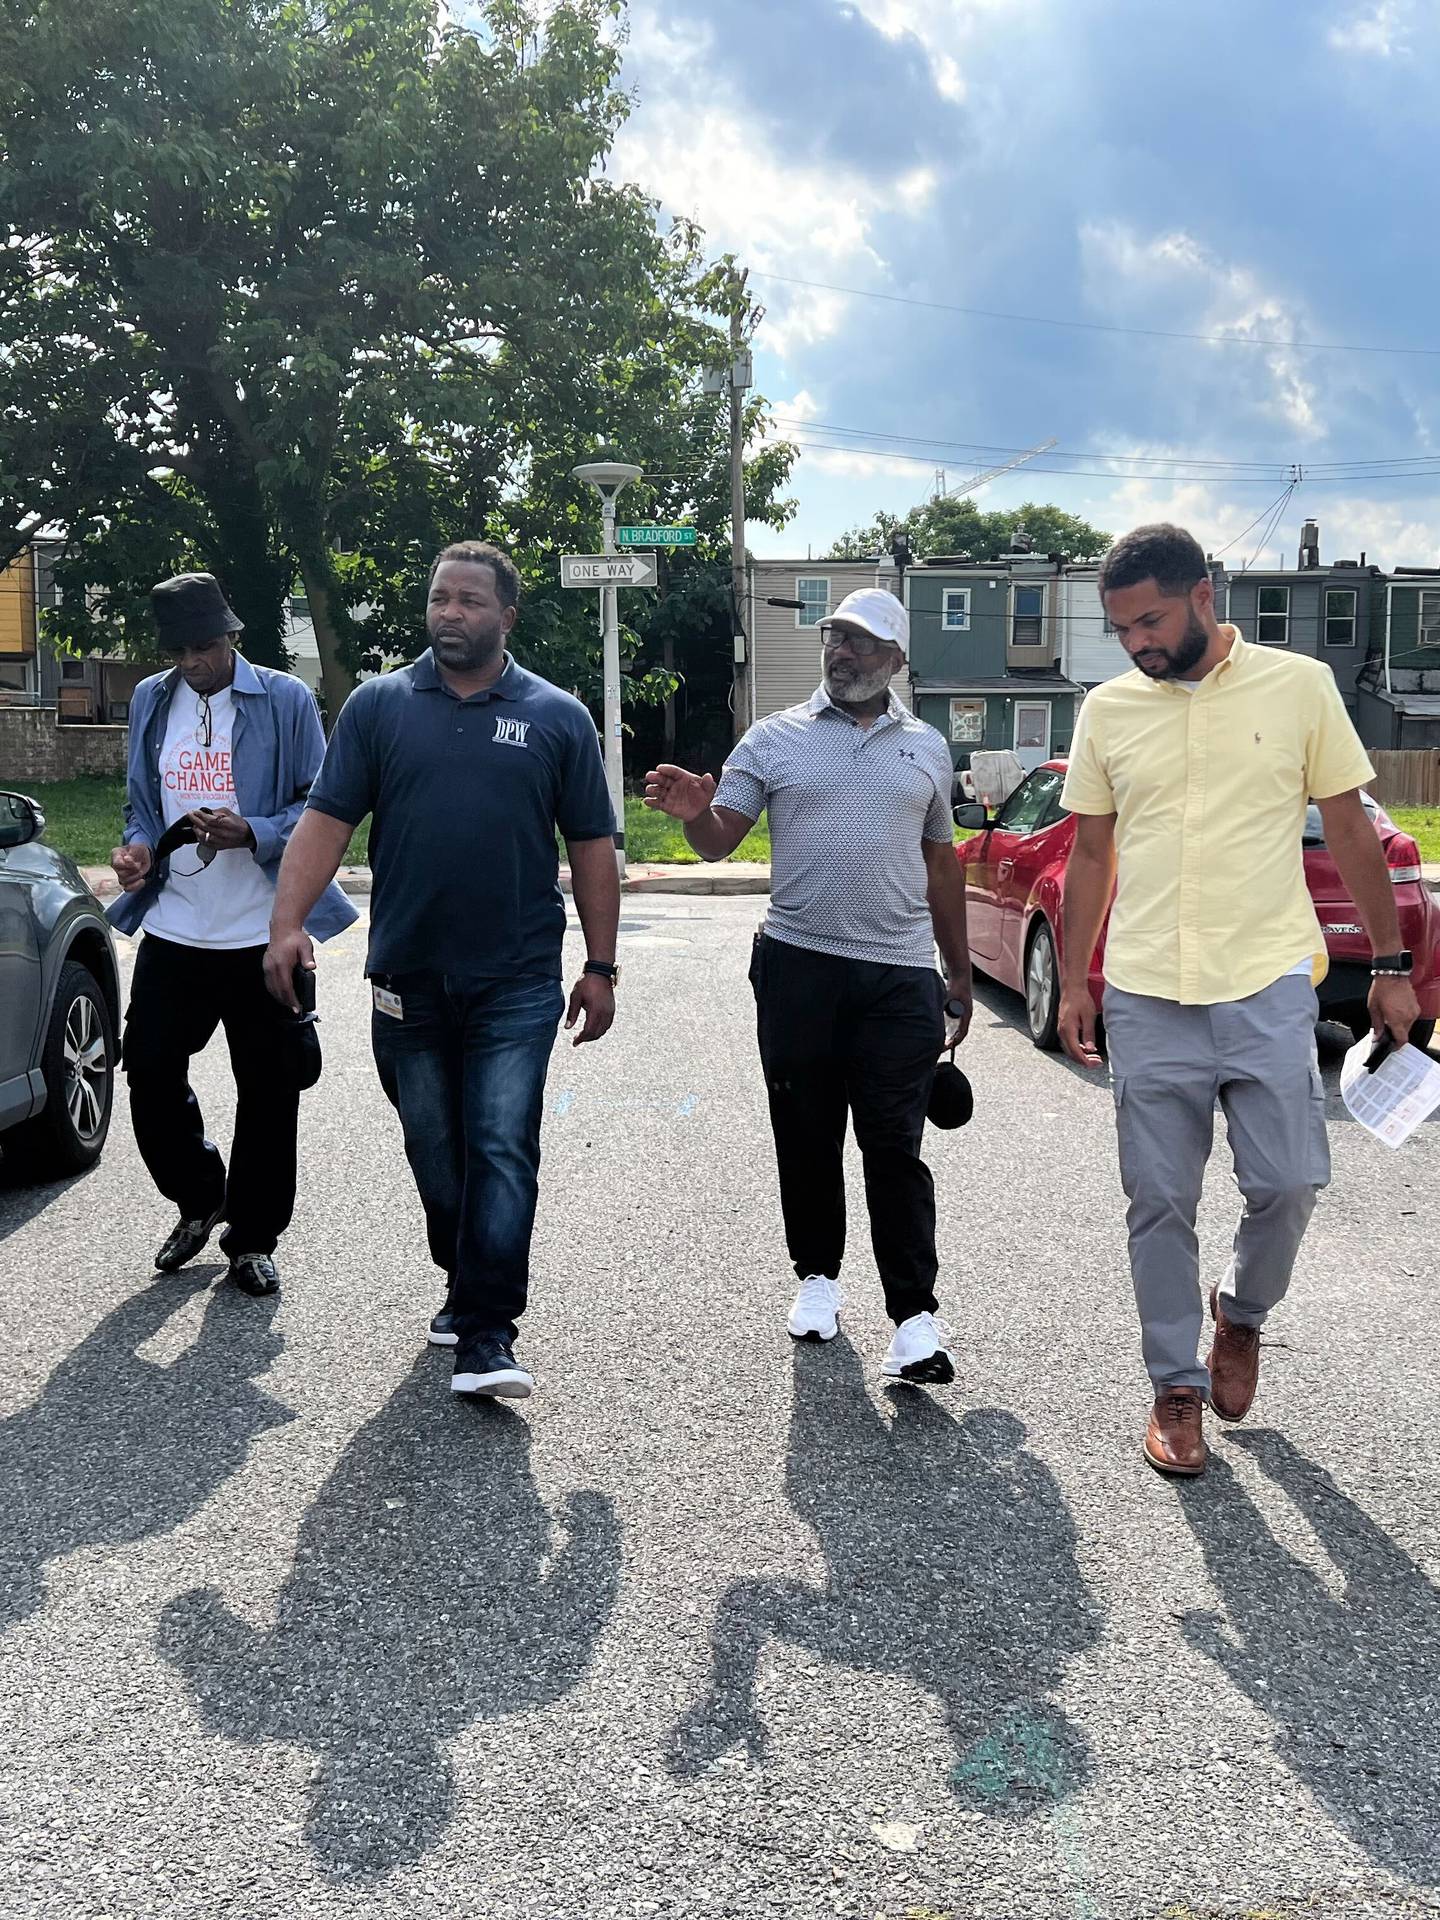 From right to left, Rick Leandry of the Mayor's Office of Neighborhood Engagement and Safety, neighborhood leader Terry "Uncle T" Williams, and Terrance Brown of the Department of Public Works walk the area of North Milton and Milliman Streets, searching for quality of life issues for city workers to address.